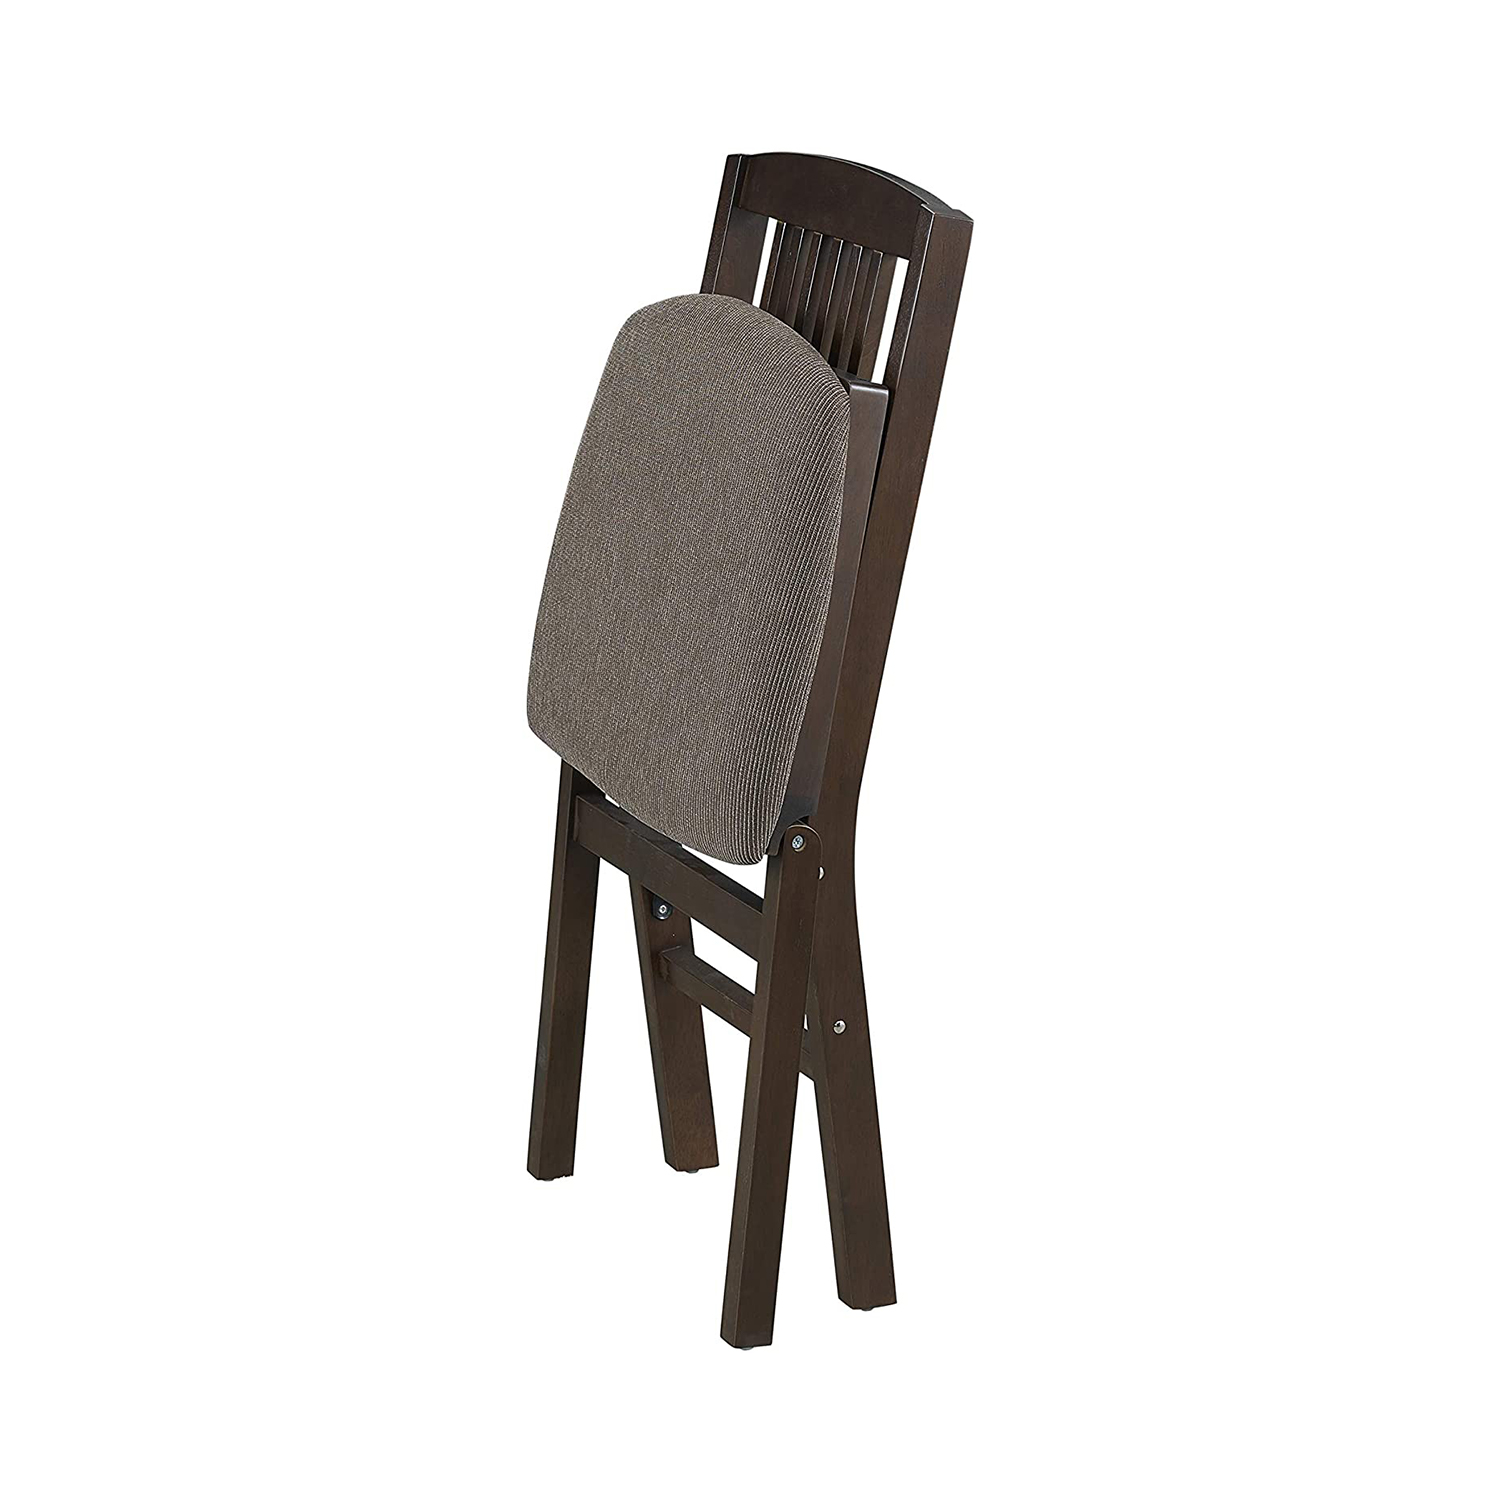 MECO Stakmore Wood Fabric Upholstered Seat Folding Chair Set, Espresso (2 Pack) - image 4 of 6